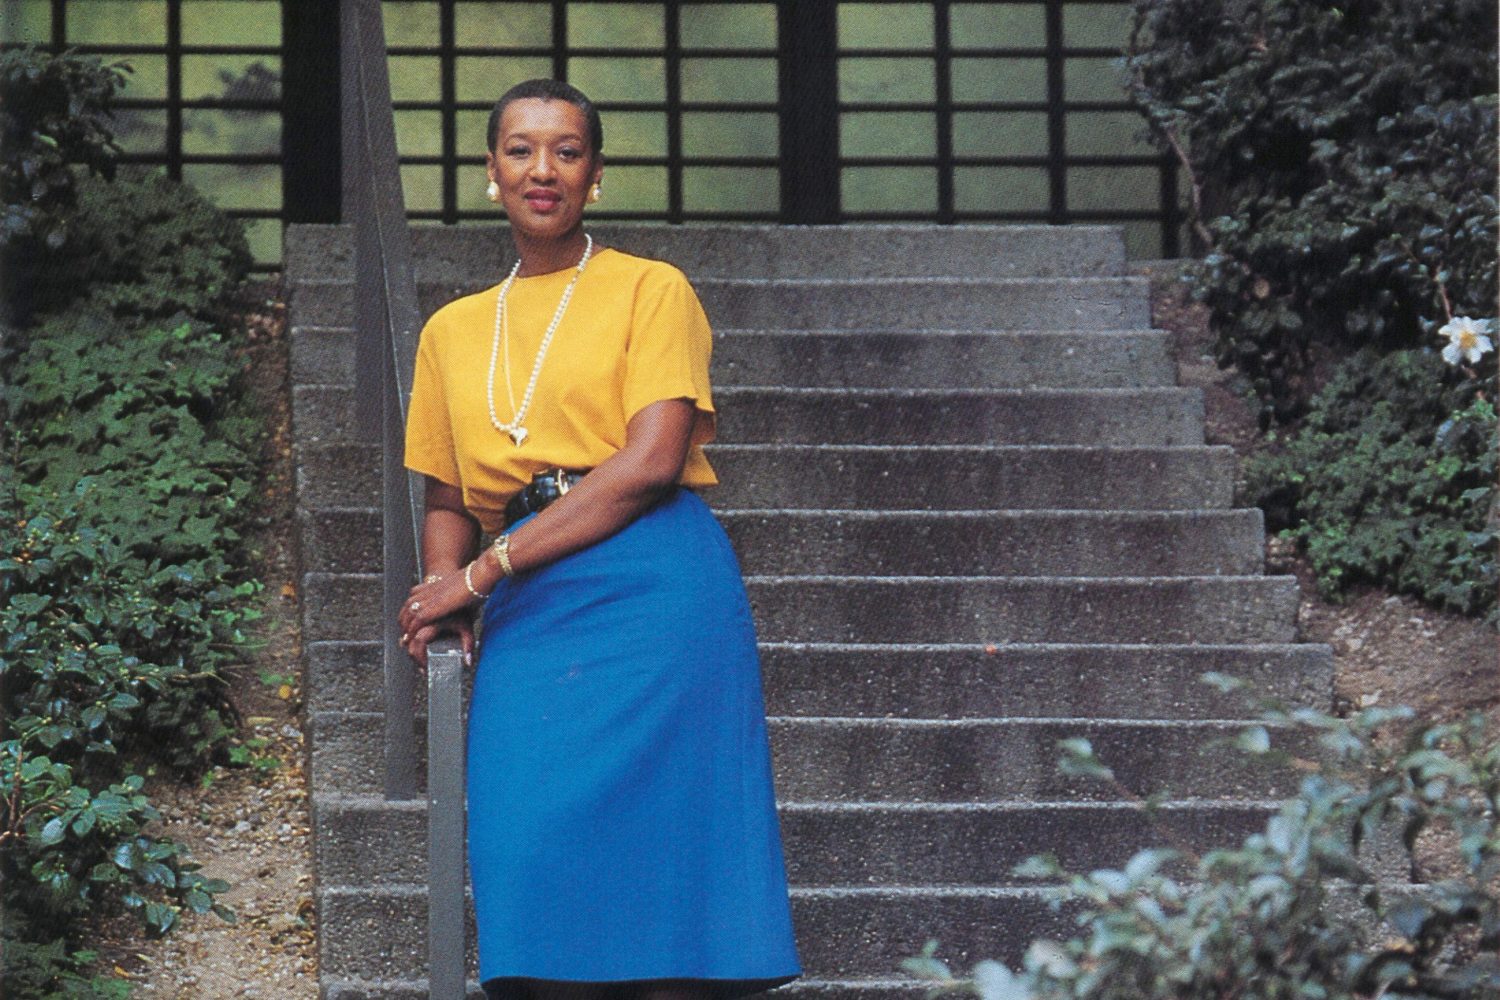 Emily Duncan standing at the bottom of an outdoor staircase in an image dated 1993.